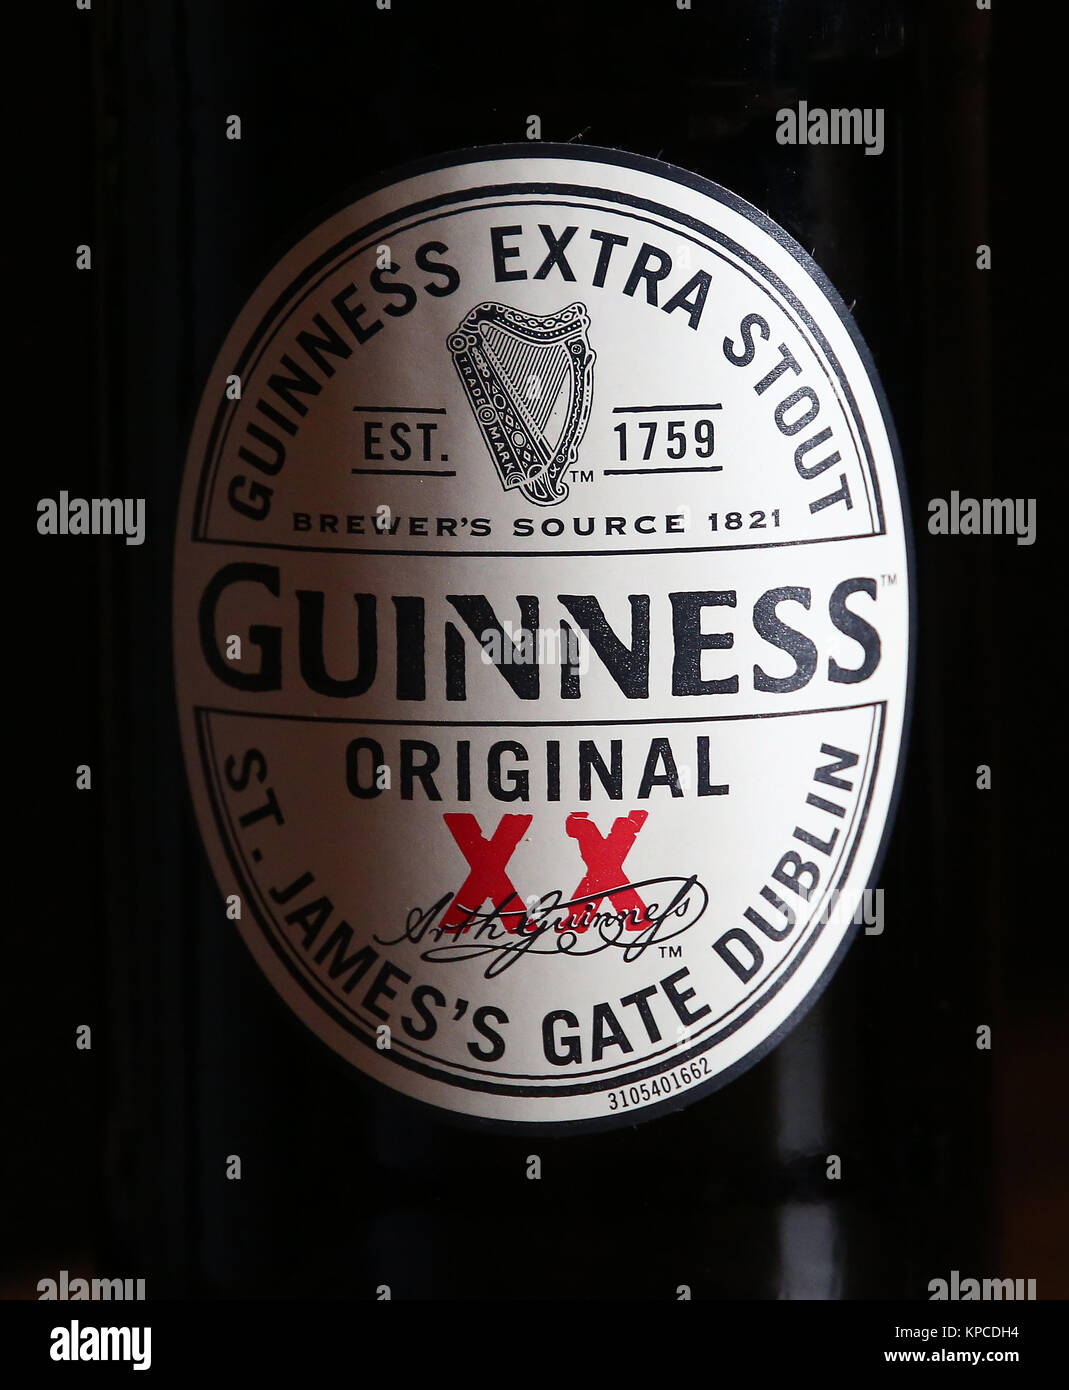 a-bottle-of-guiness-original-extra-stout-on-a-table-in-a-pub-stock